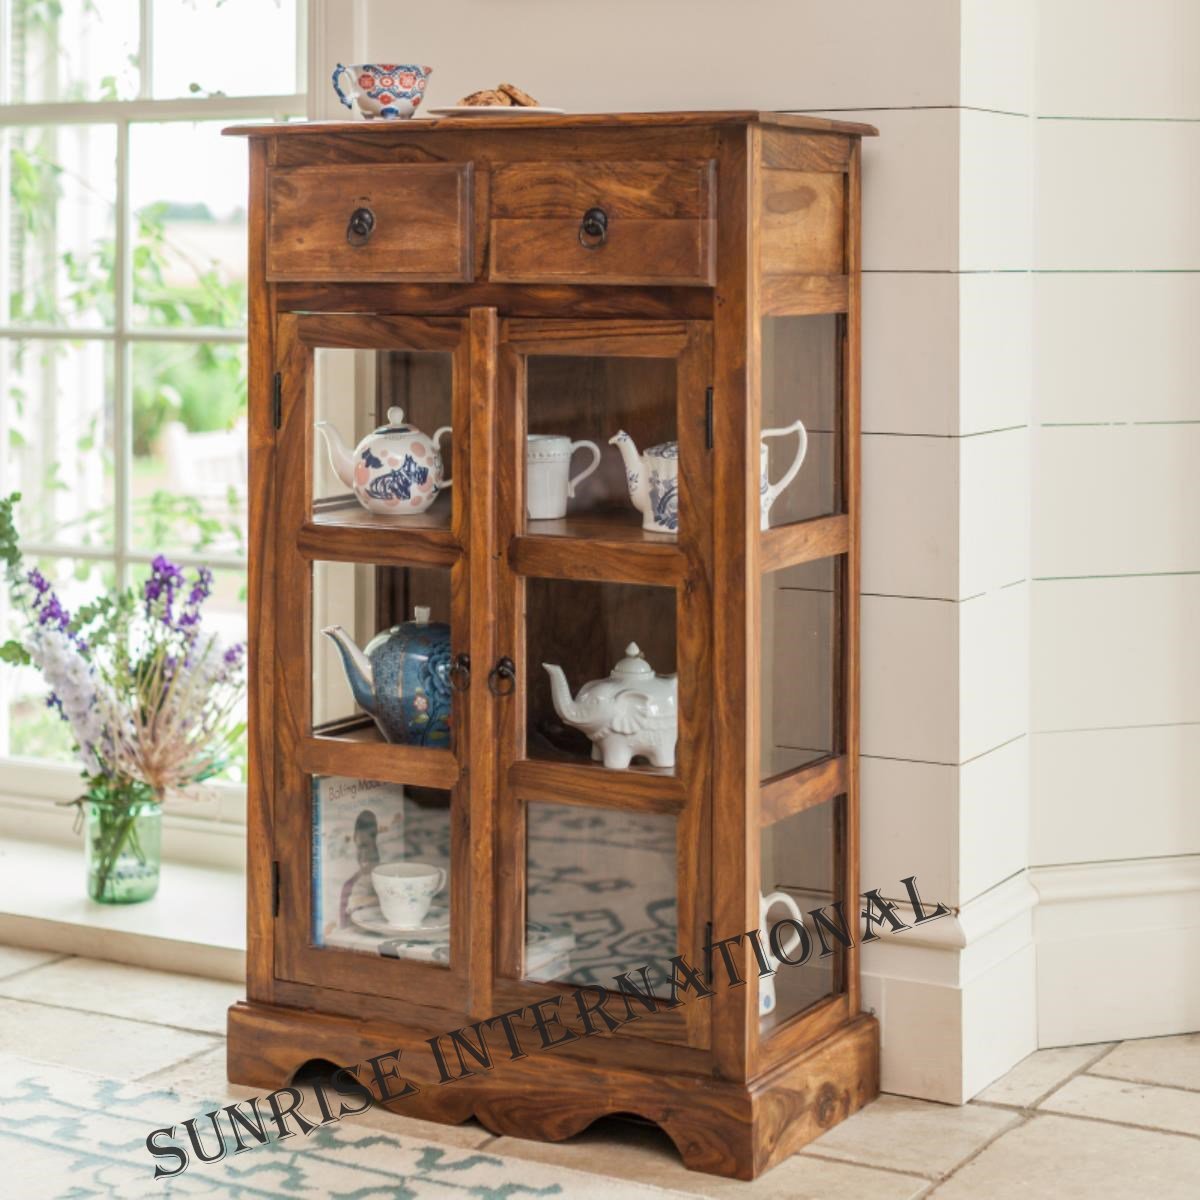 Solid Wood Display Glass Cabinet